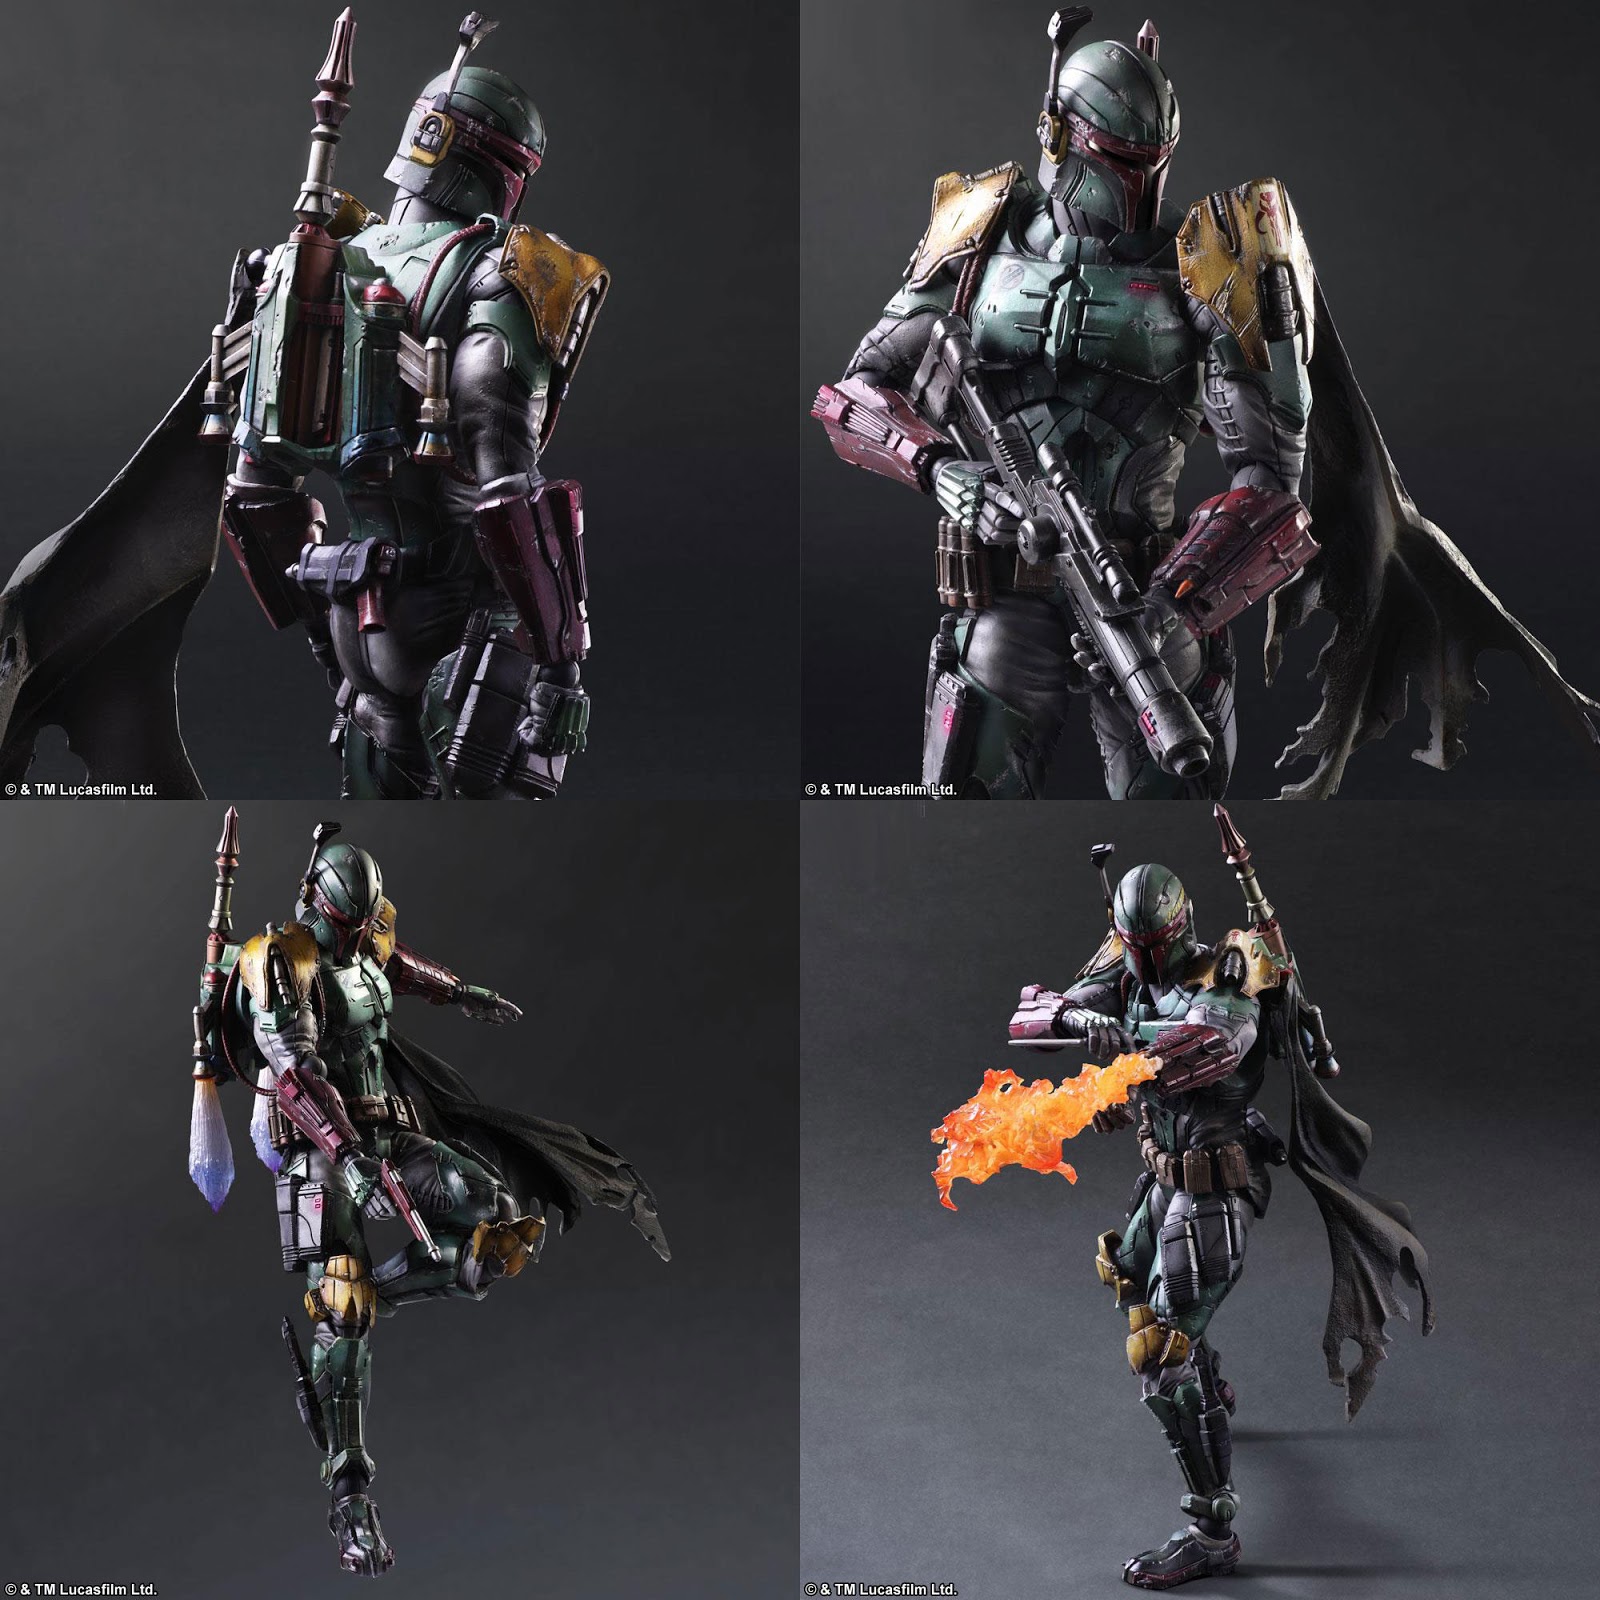 Star Wars Variant Play Arts Kai from SQUARE ENIX - BOBA Star Wars Variant Play Arts Kai From SQUARE ENIX 1